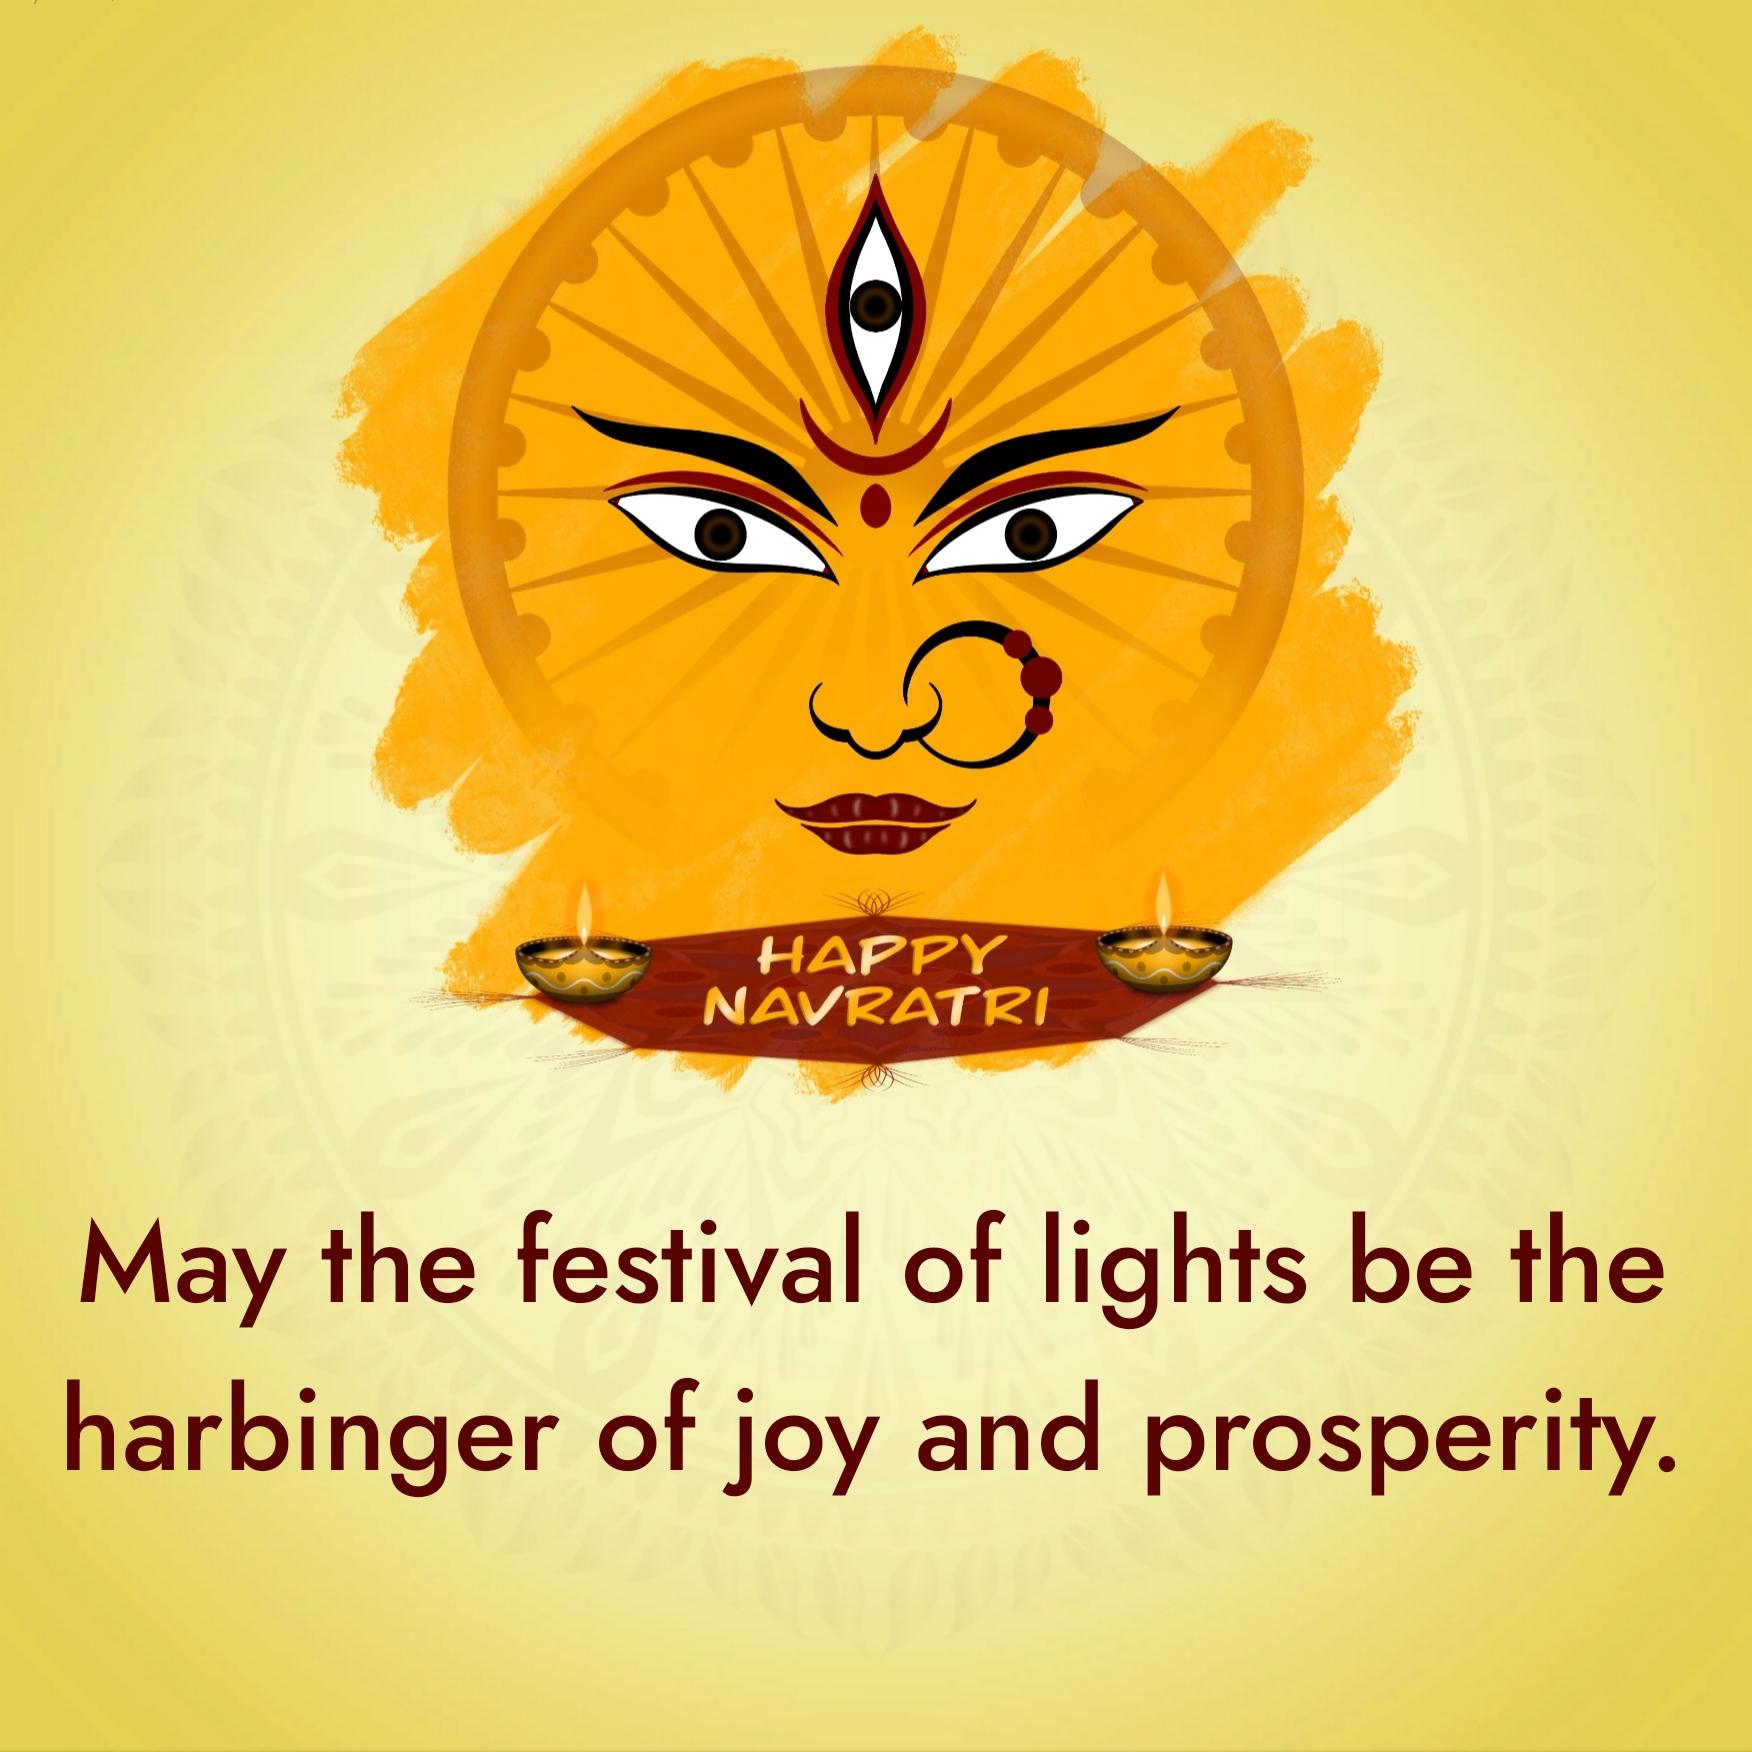 May the festival of lights be the harbinger of joy and prosperity